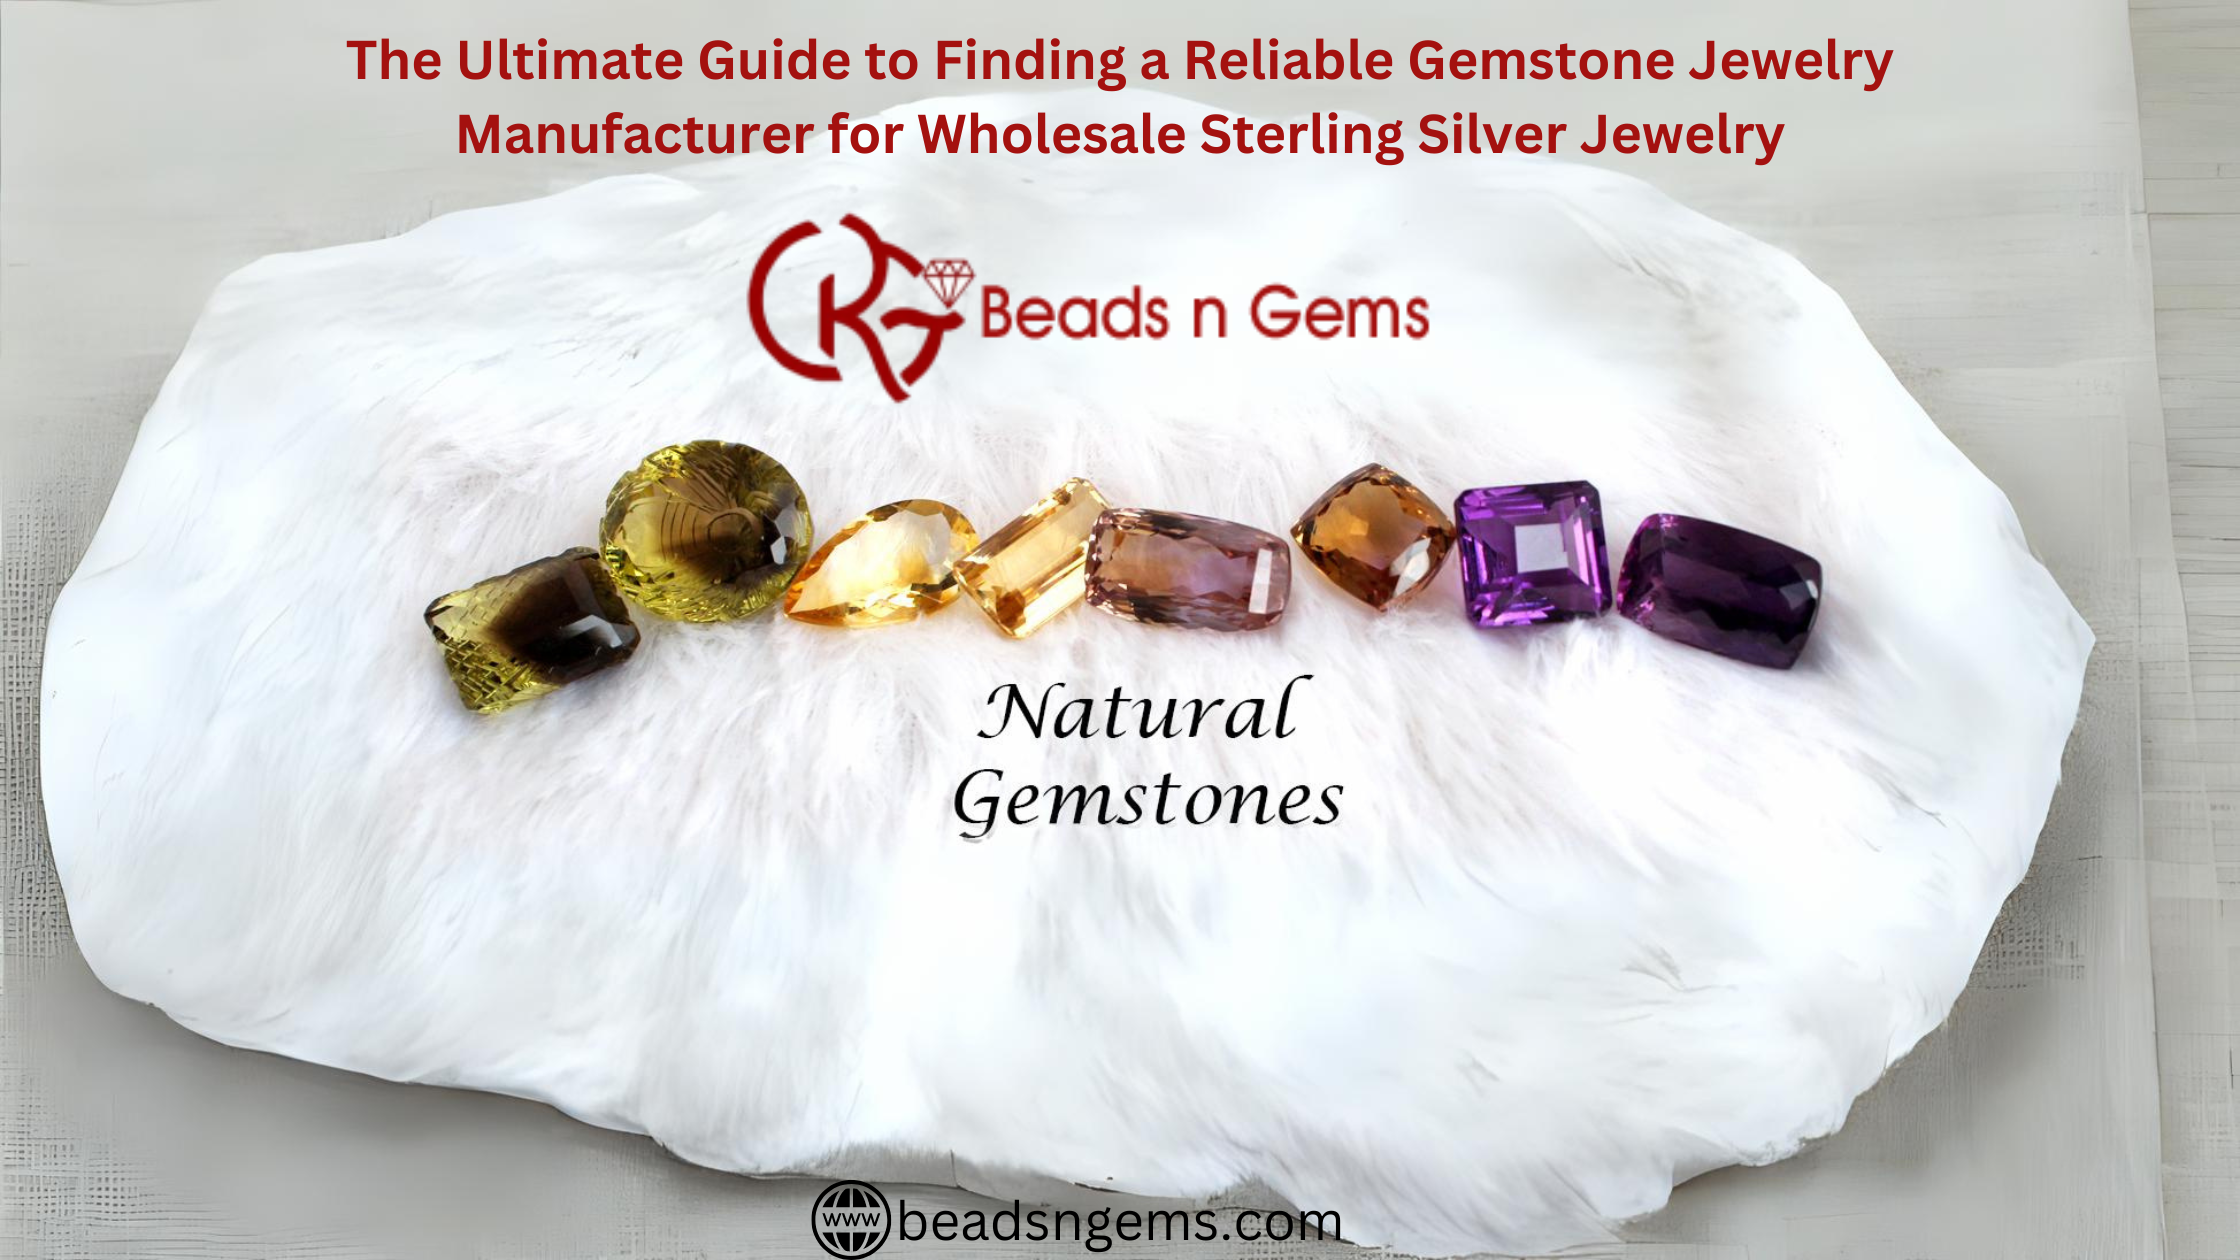 The Ultimate Guide to Finding a Reliable Gemstone Jewelry Manufacturer for Wholesale Sterling Silver Jewelry